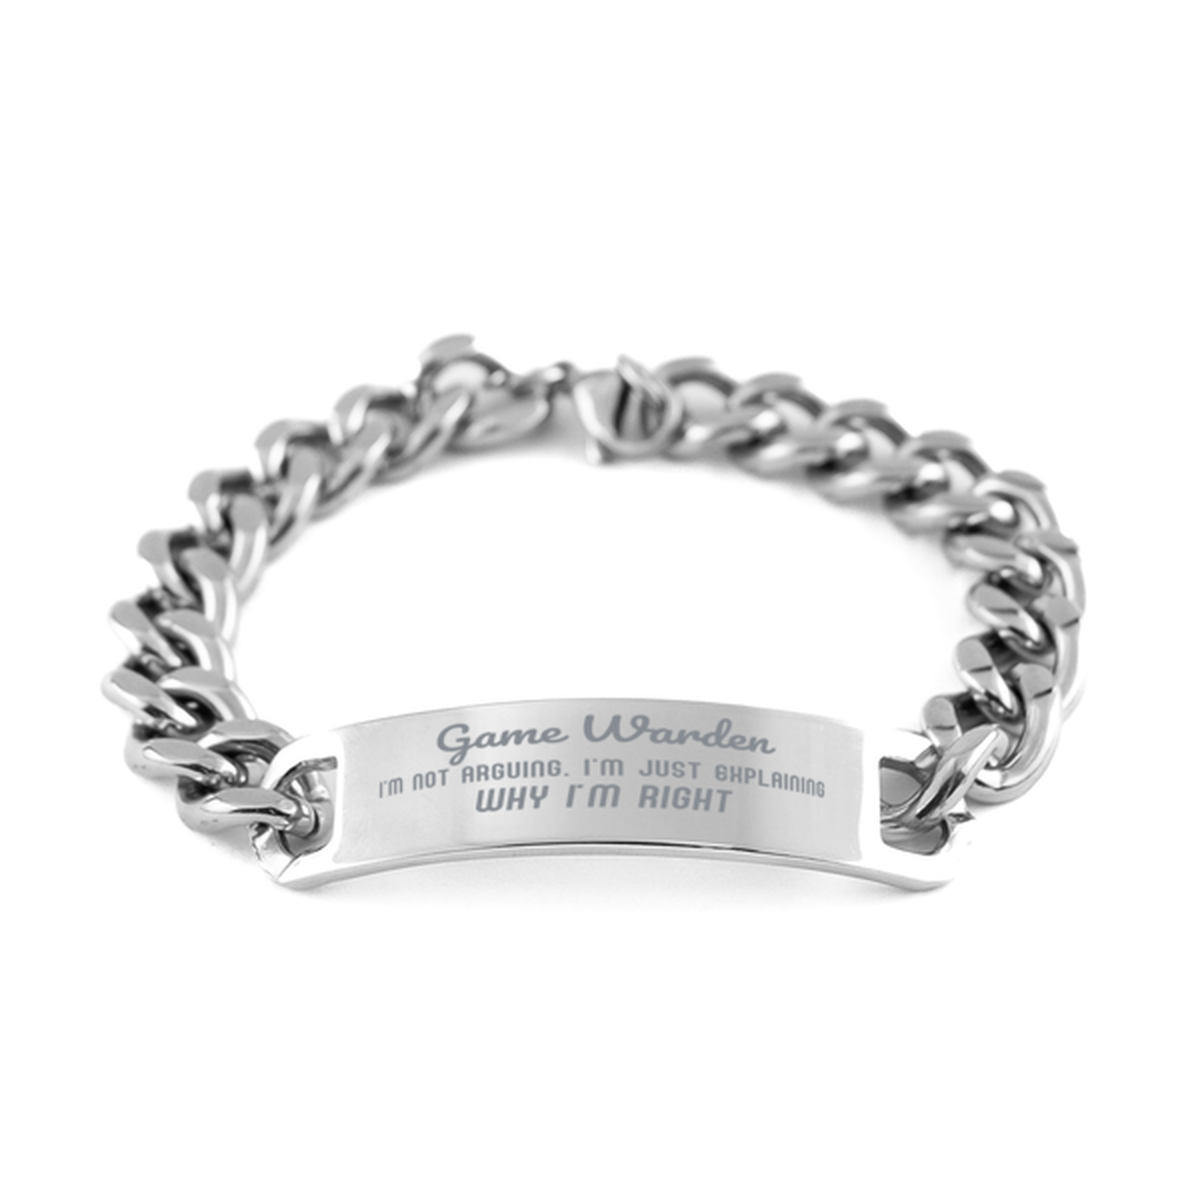 Game Warden I'm not Arguing. I'm Just Explaining Why I'm RIGHT Cuban Chain Stainless Steel Bracelet, Graduation Birthday Christmas Game Warden Gifts For Game Warden Funny Saying Quote Present for Men Women Coworker